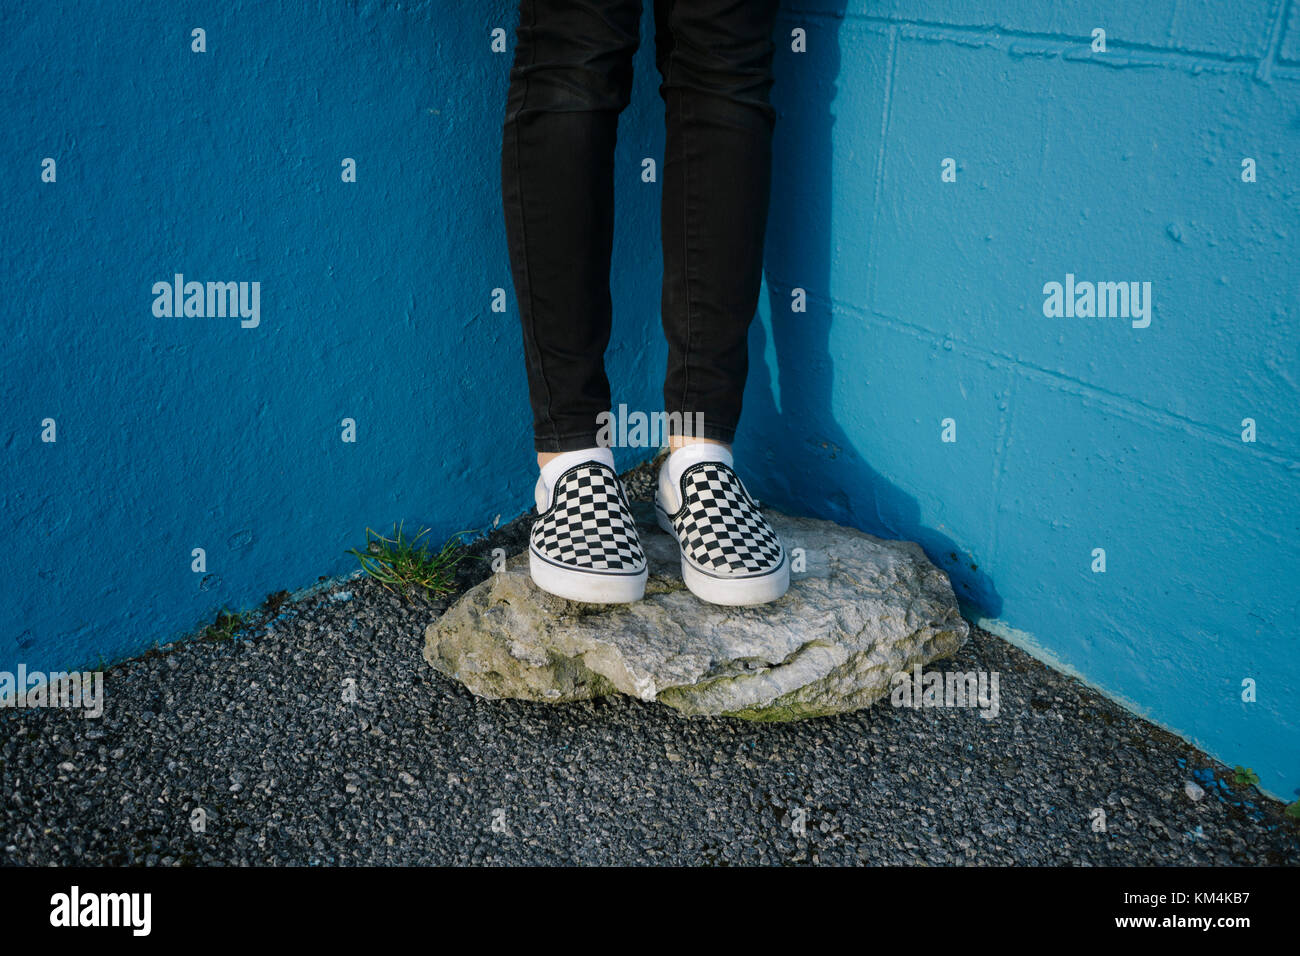 Teenage girl wearing black trousers and checkered canvas shoes, standing on rock against blue wall. Stock Photo